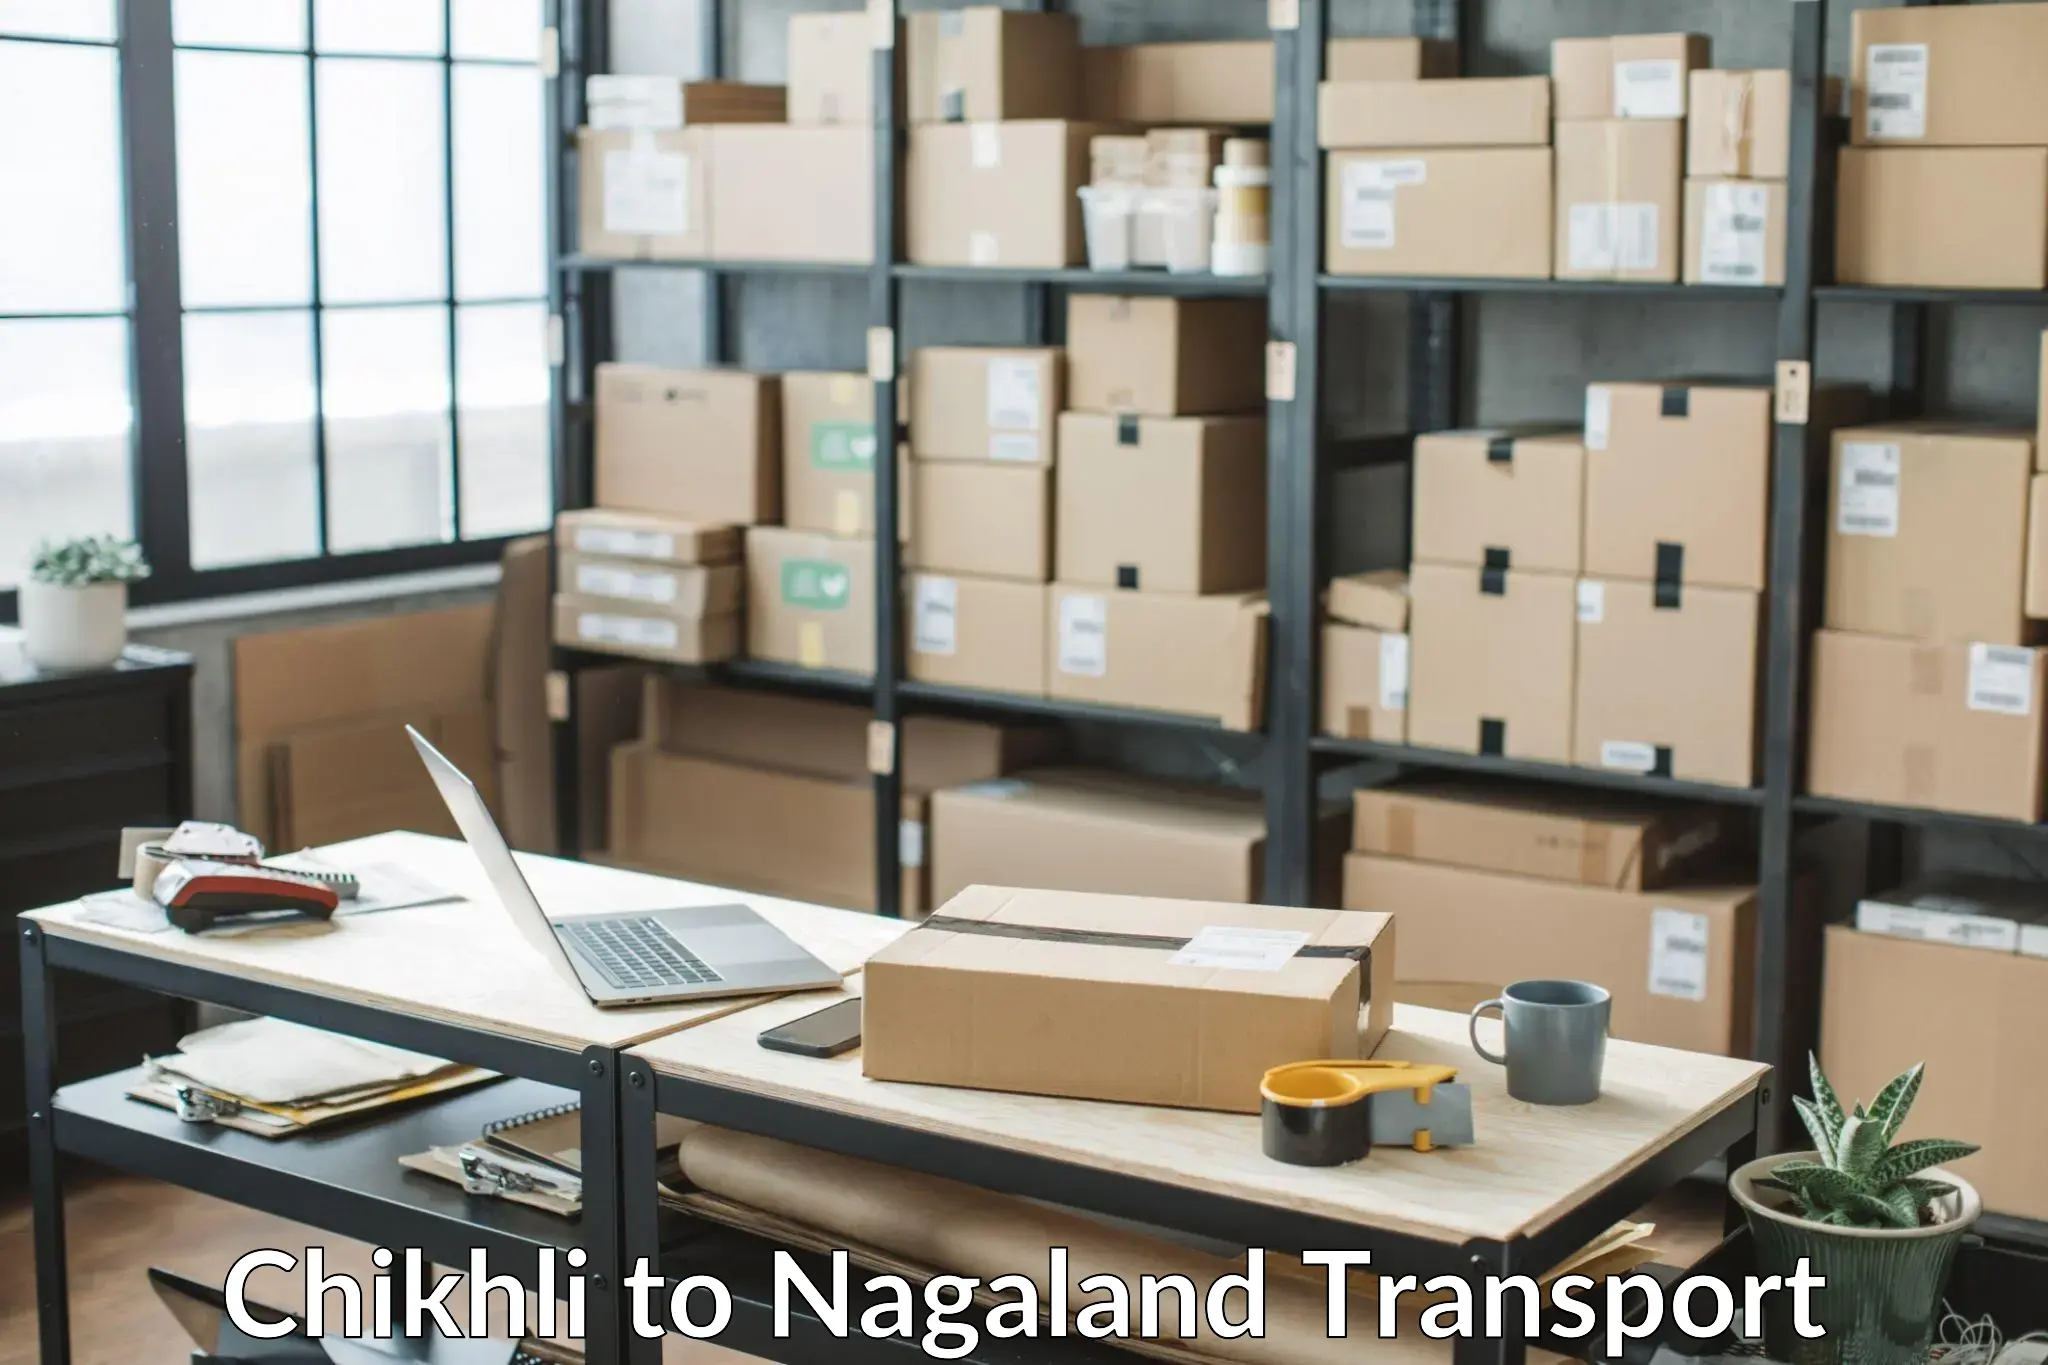 Two wheeler parcel service Chikhli to Nagaland